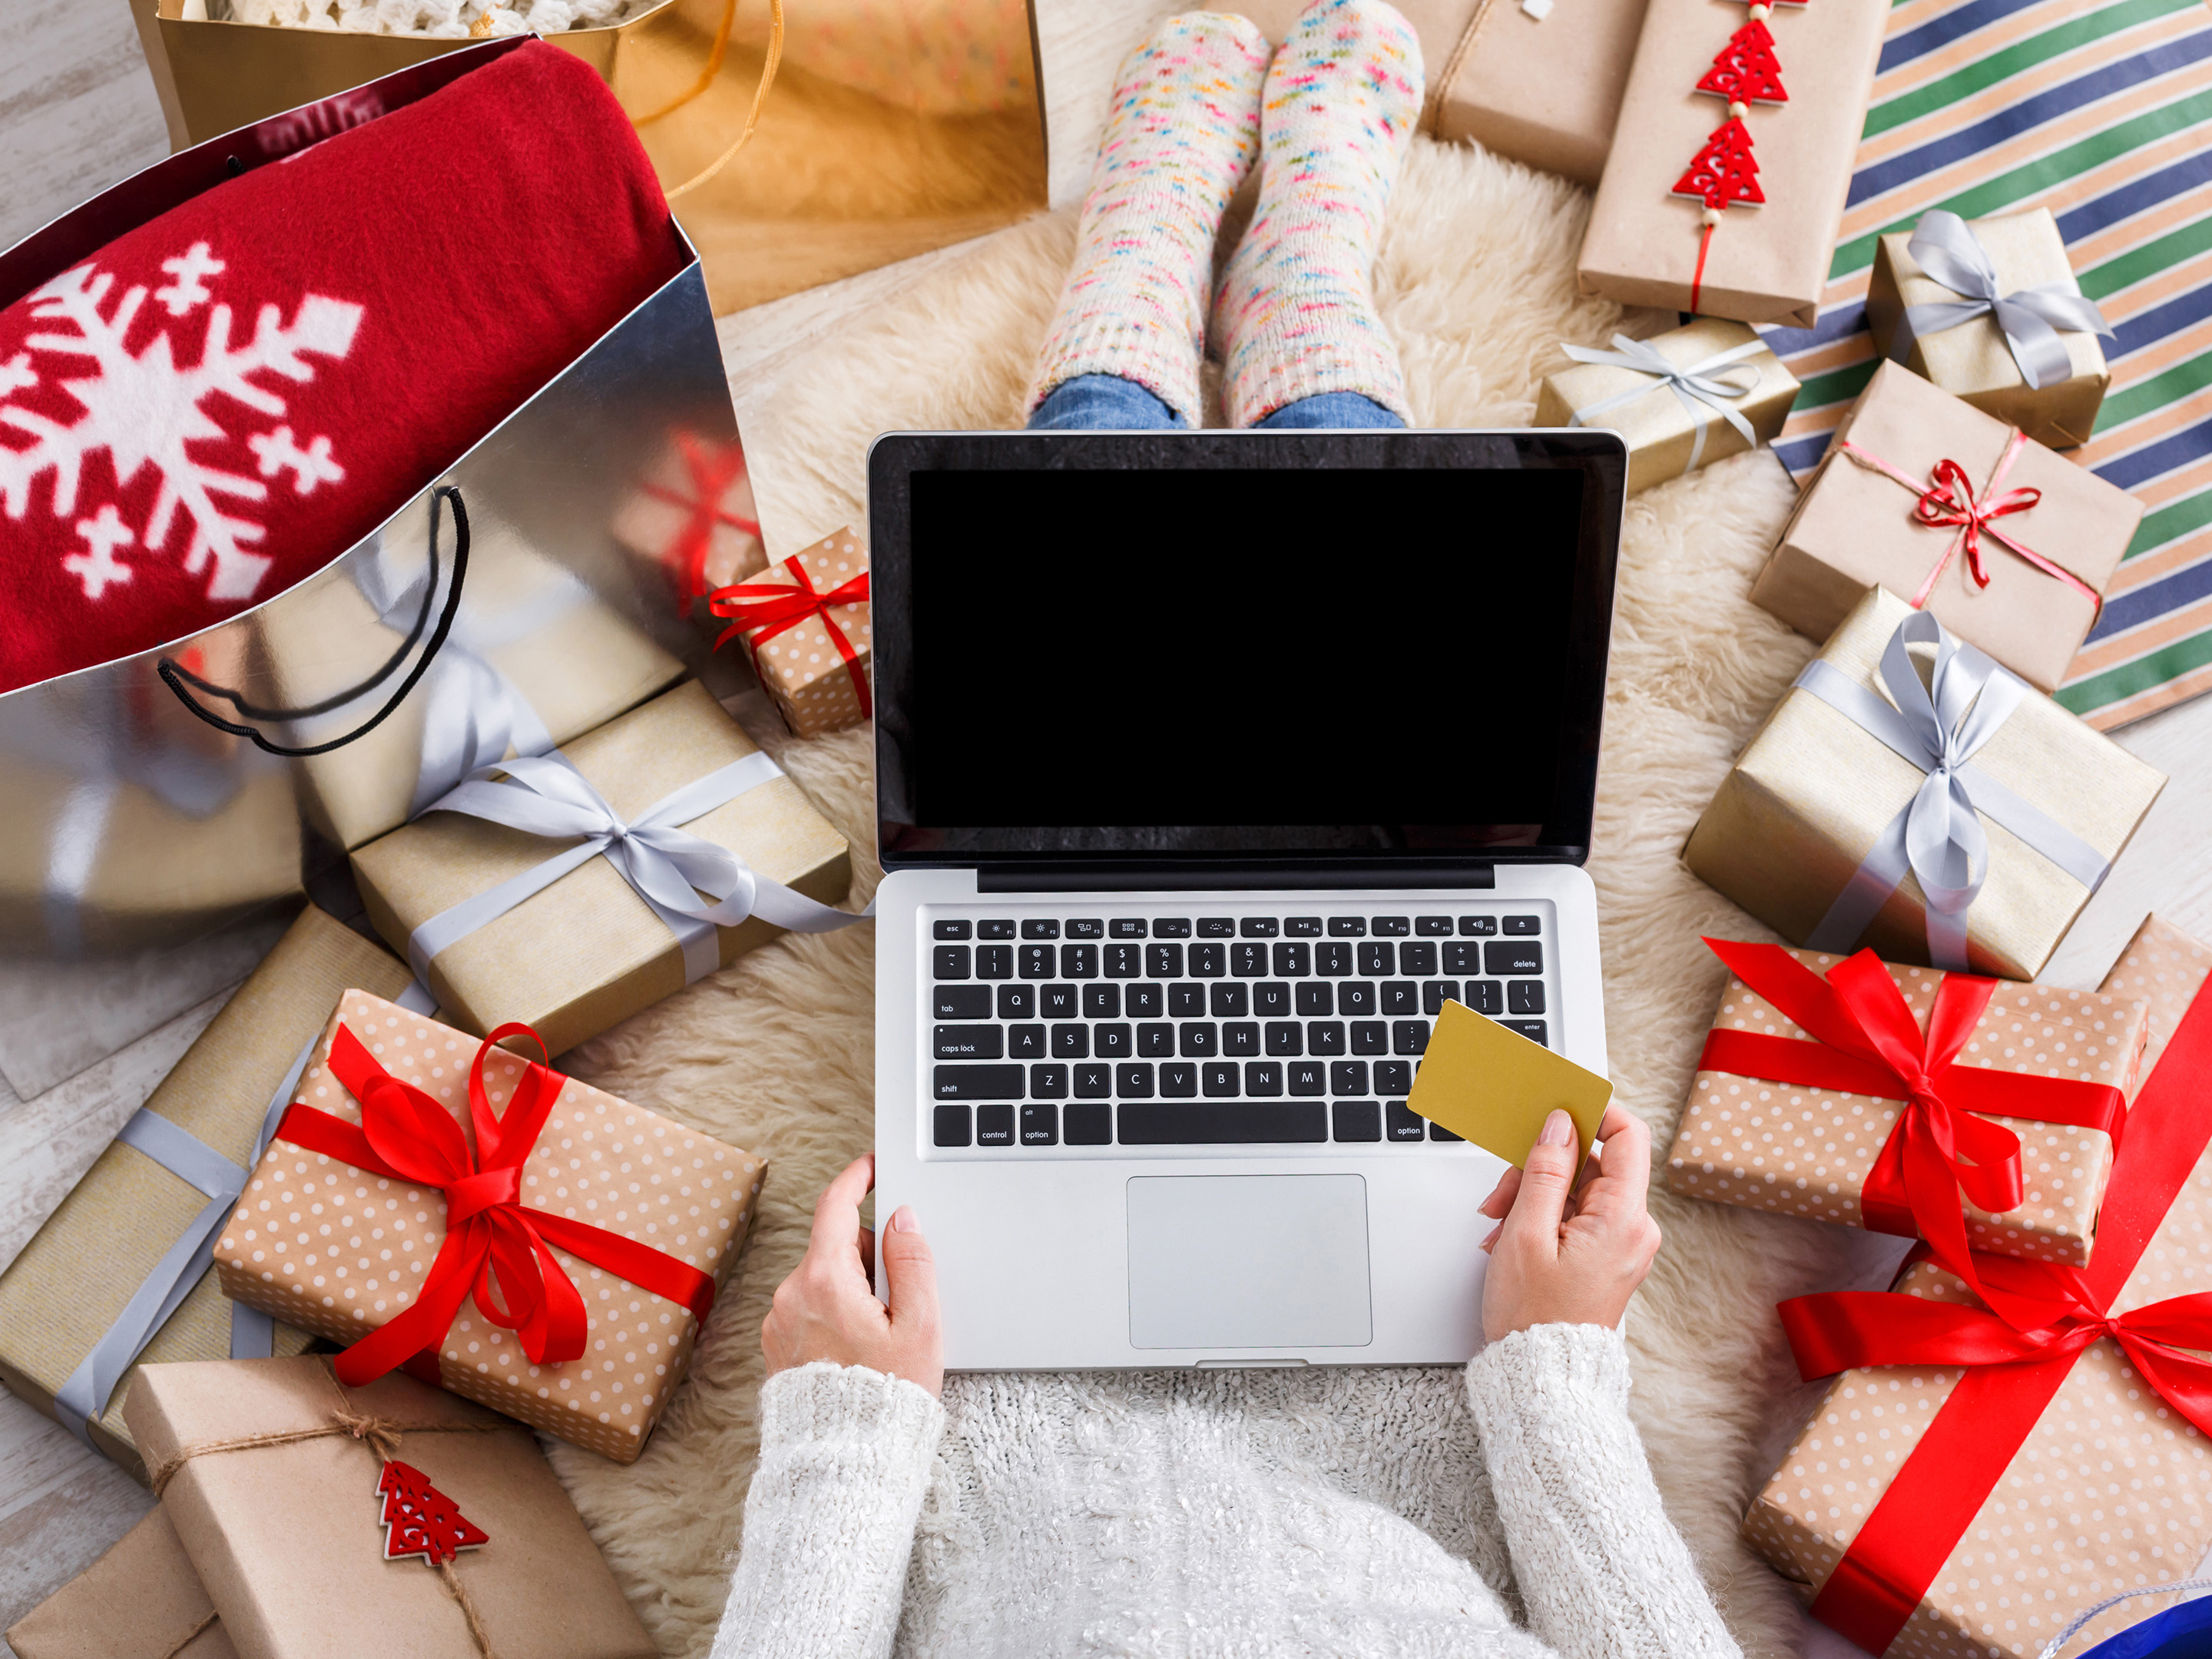 Shop Holiday Deals on Laptops 